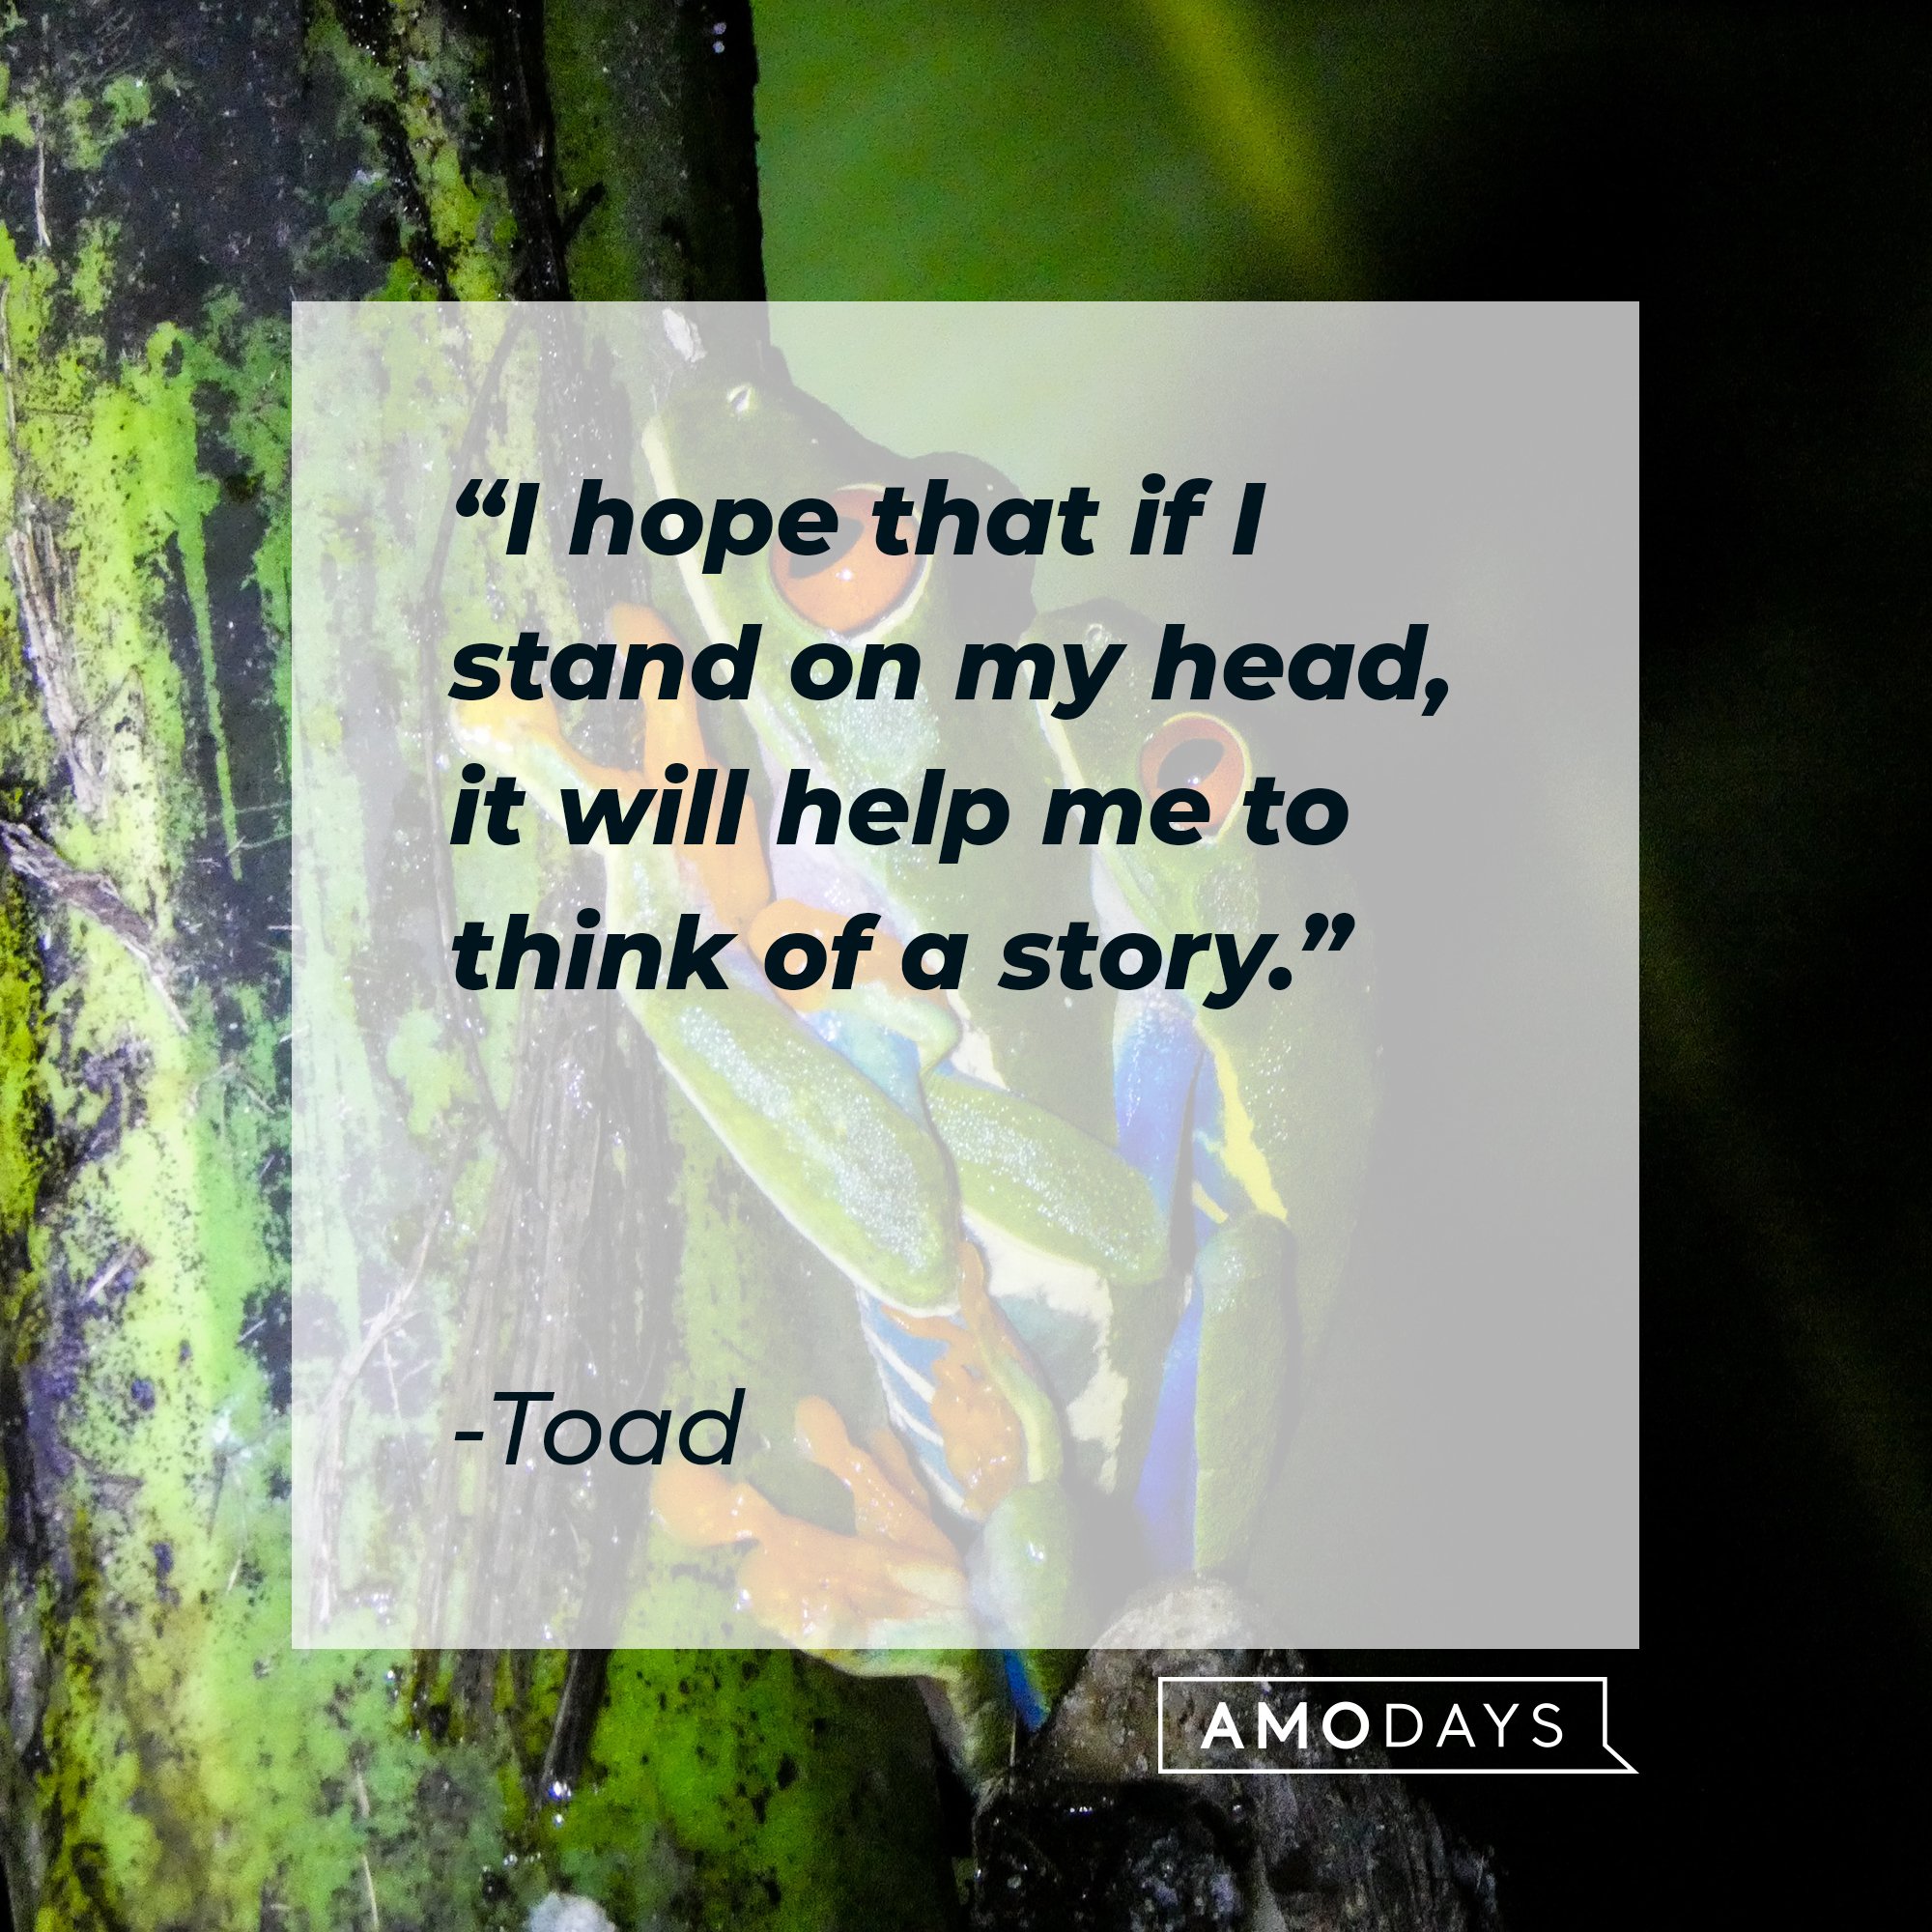 Toad's quote: "I hope that if I stand on my head, it will help me to think of a story." | Image: AmoDays